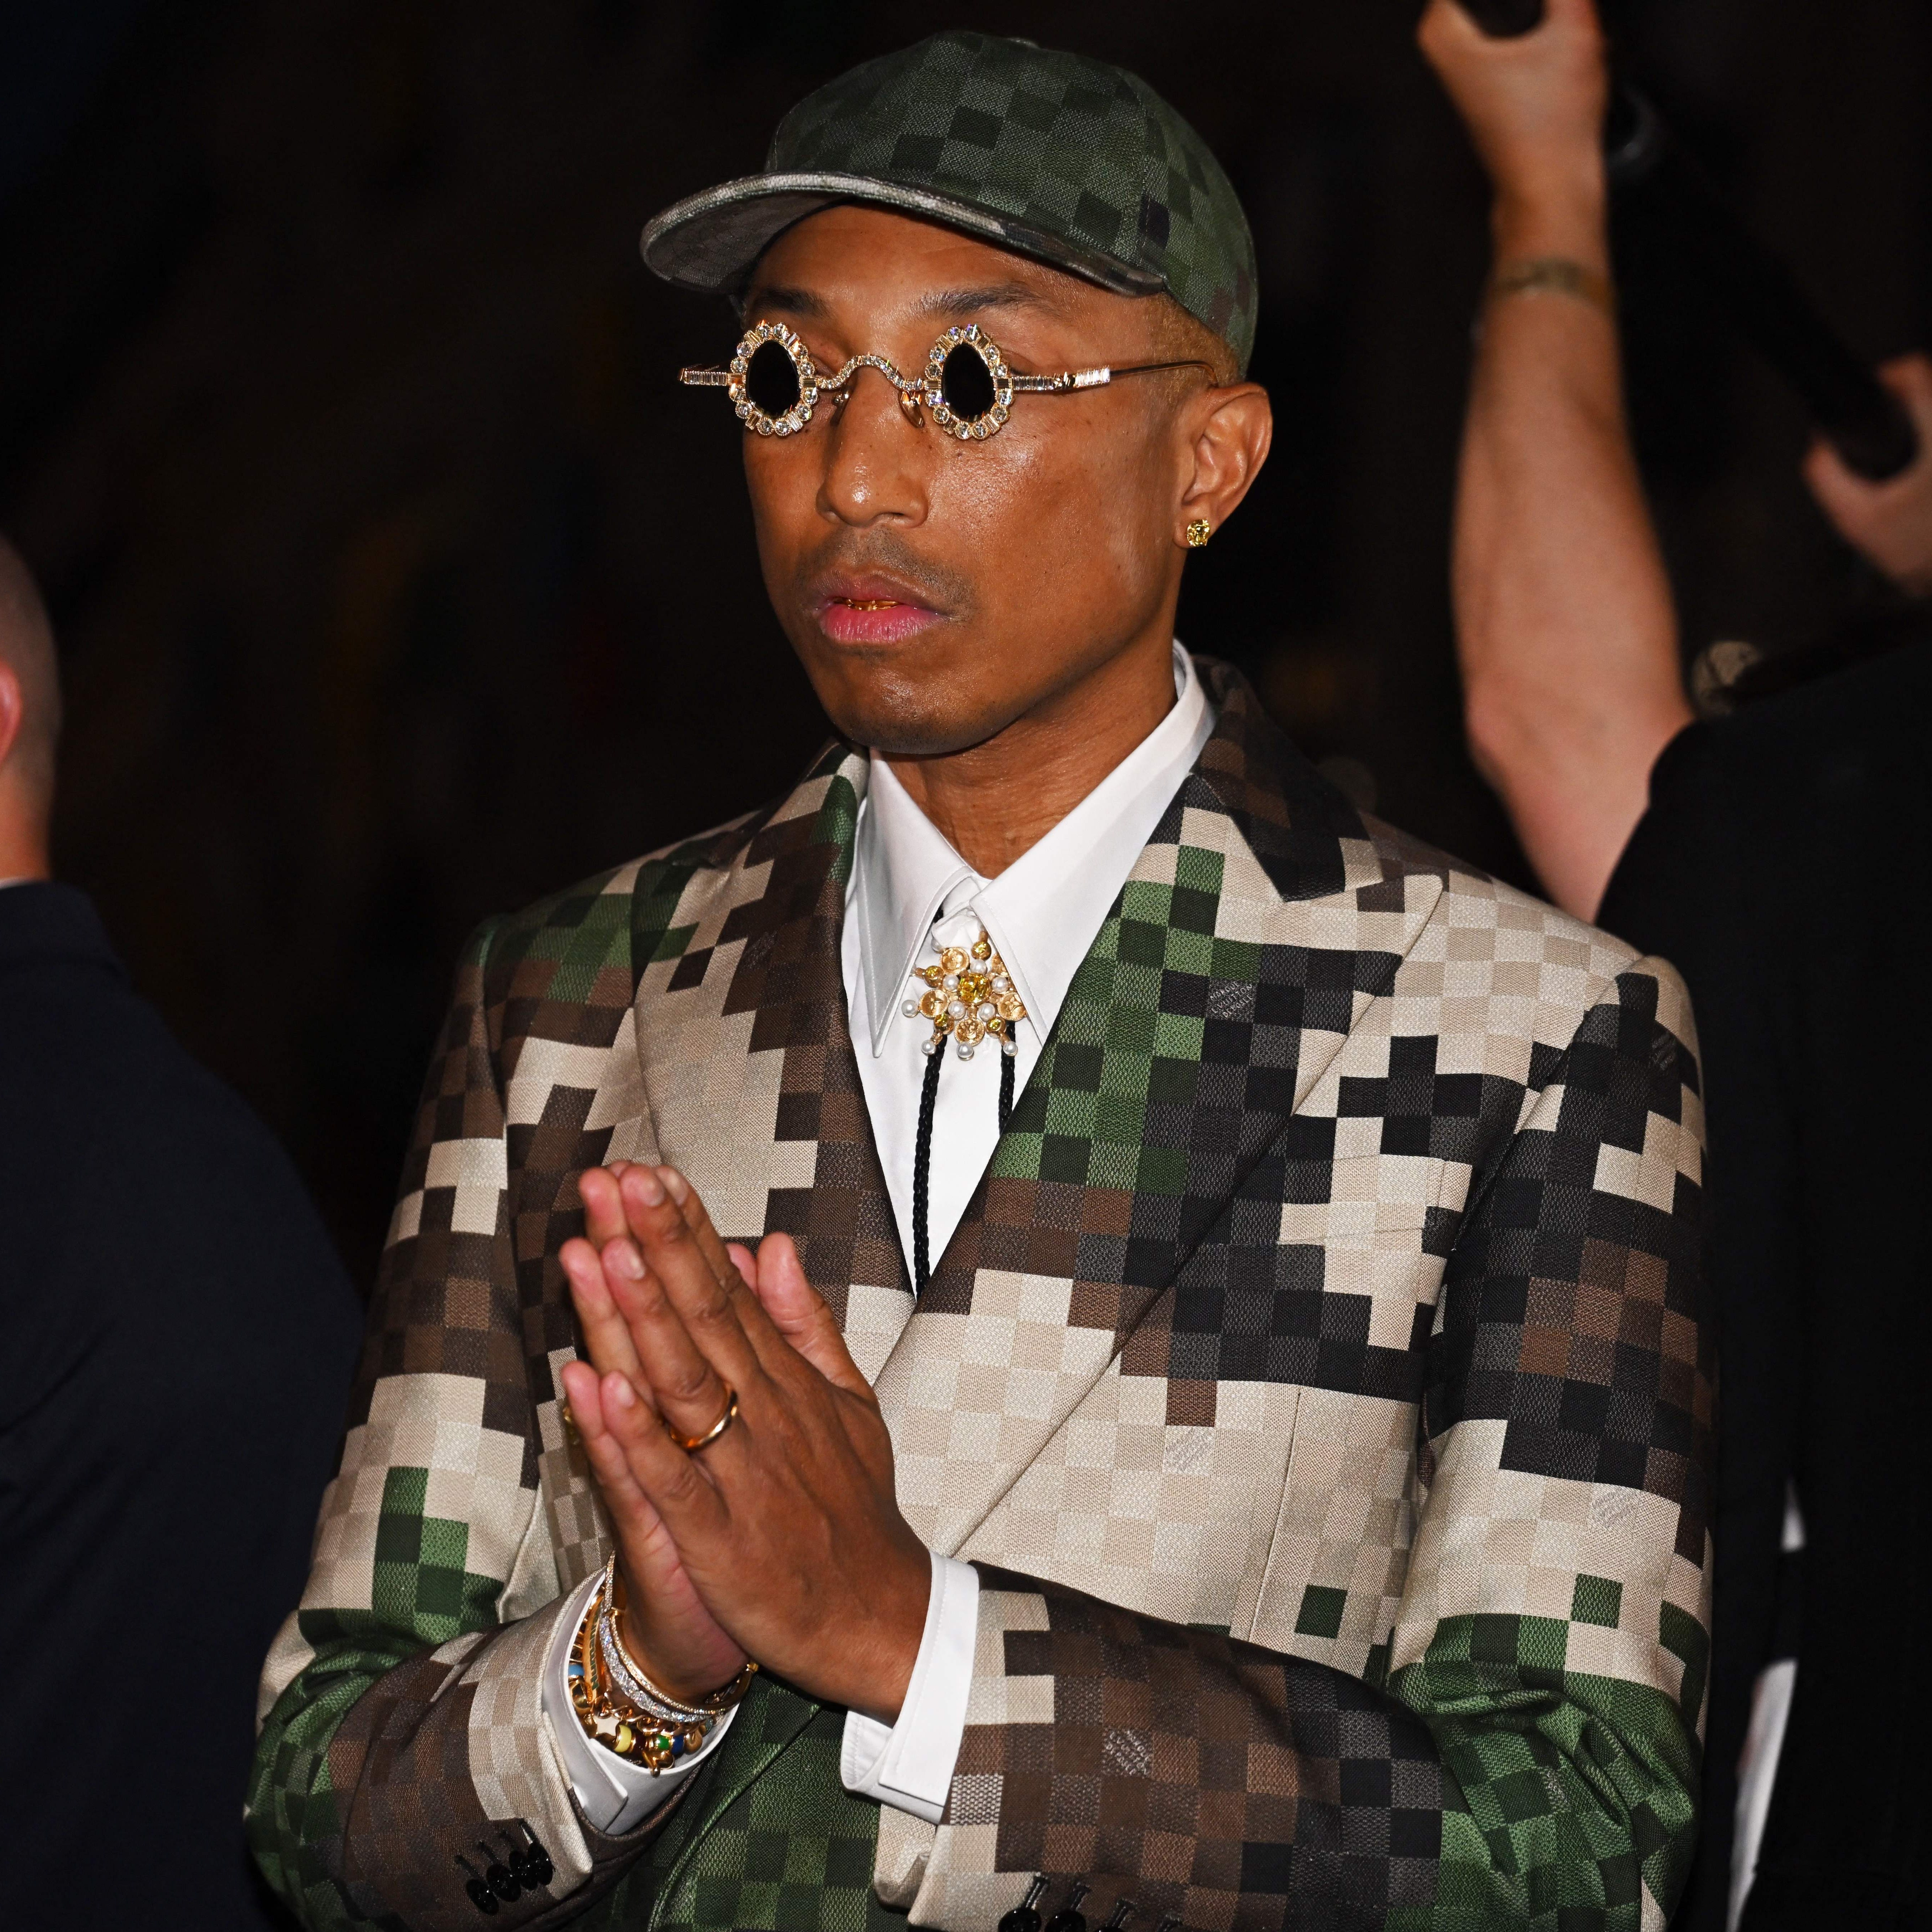 Behind the scenes of Pharrell's Louis Vuitton debut, starring LeBron James, Pusha T, and more